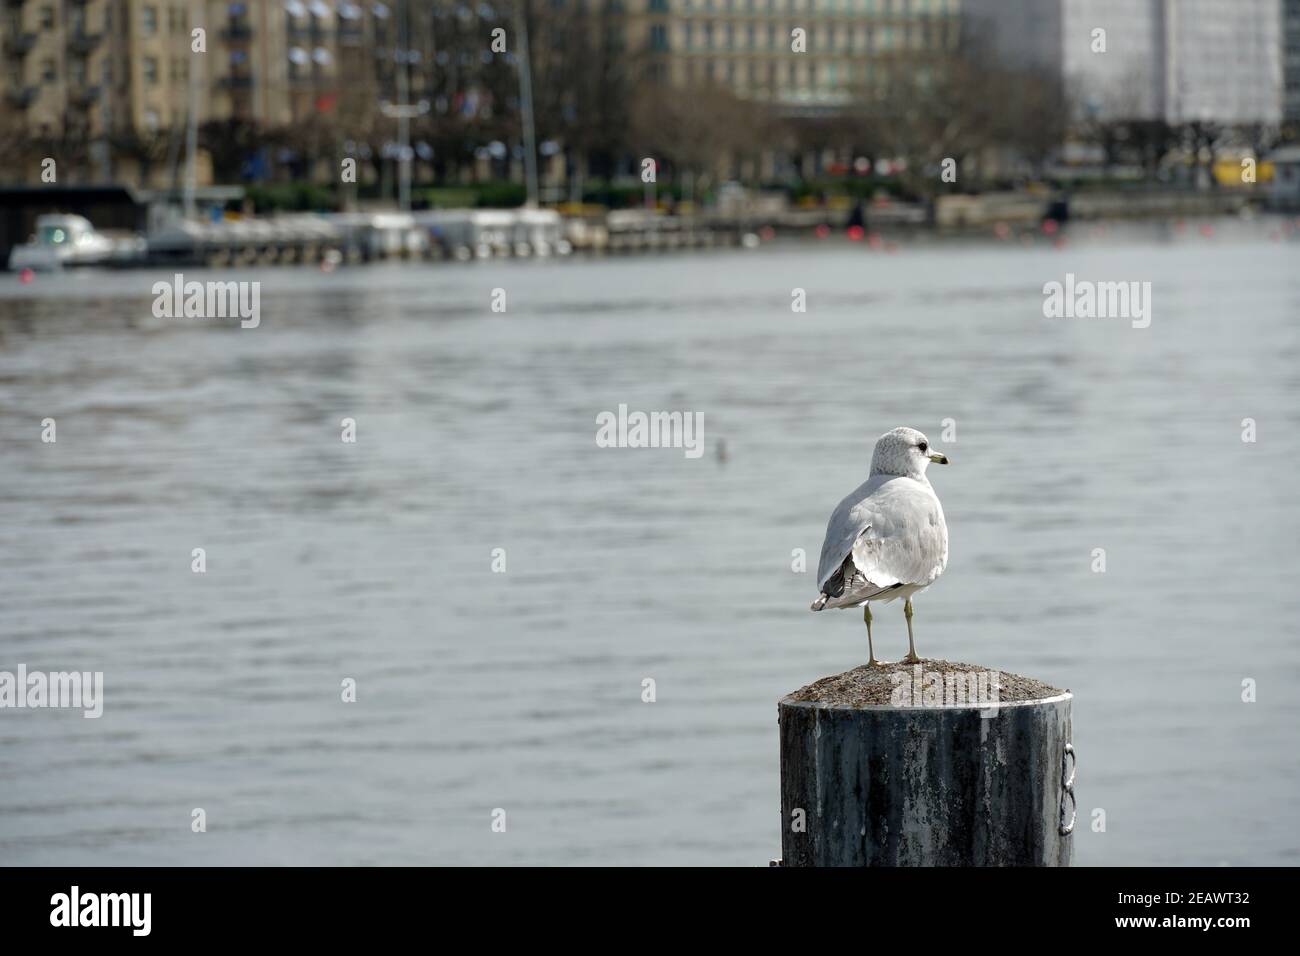 A seagull standing on a mooring pylon on the coast of Lake Zurich in town Zurich Switzerland. There is lake in the background and blurred silhouettes. Stock Photo